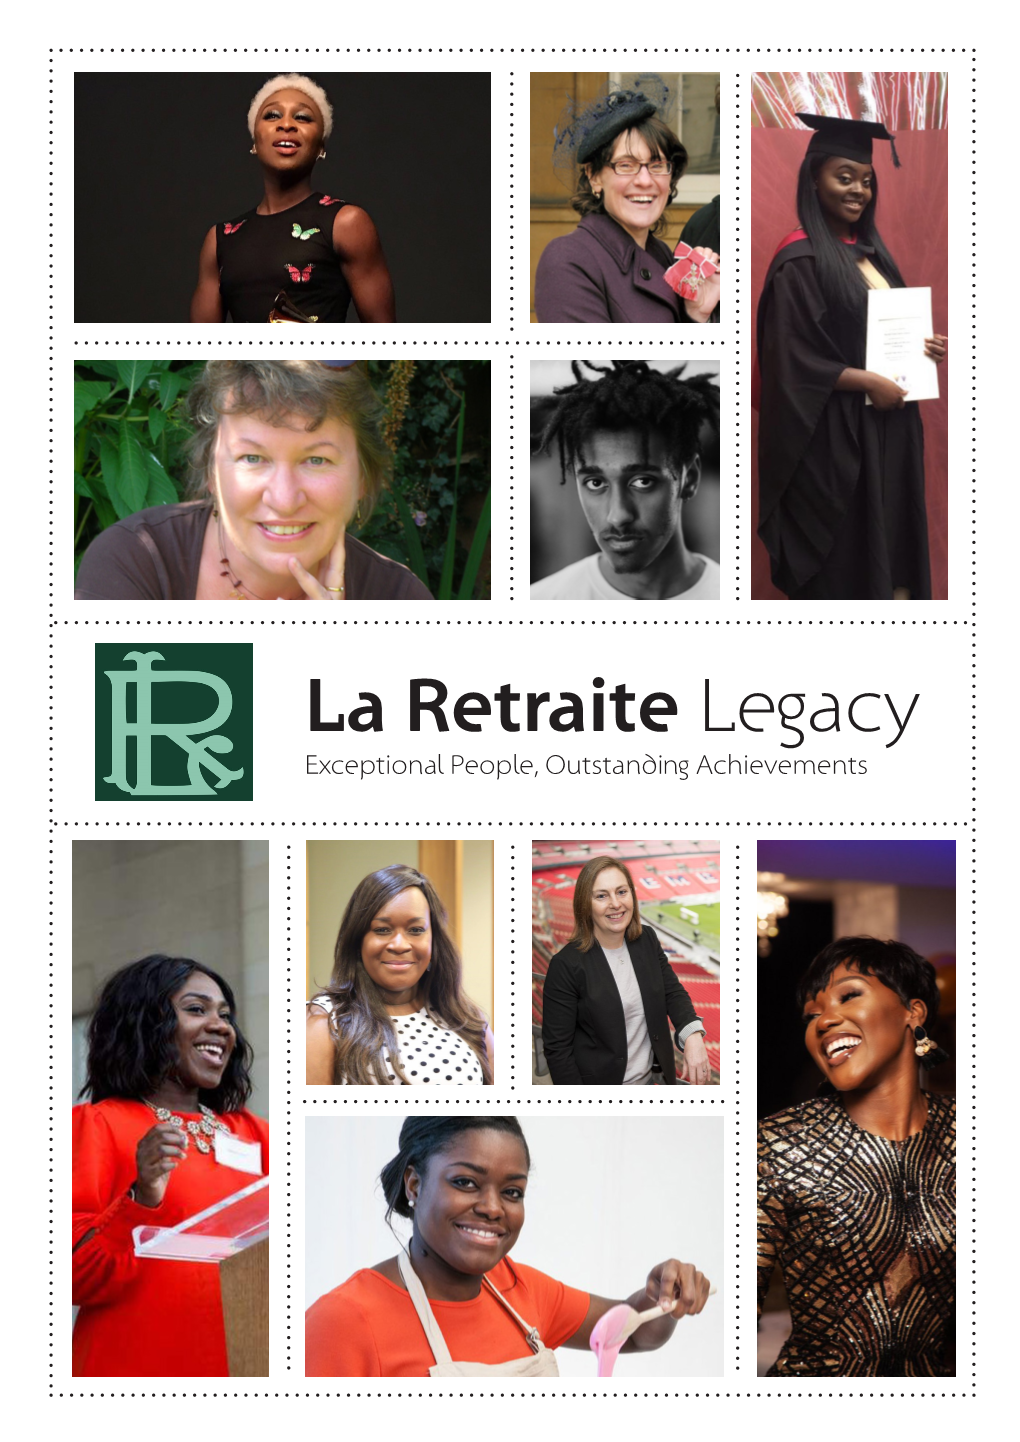 La Retraite Legacy Exceptional People, Outstanding Achievements Also Resilientanddriventopersevere,Evenifthey Aren’Tsuccessfulthefirsttimearound